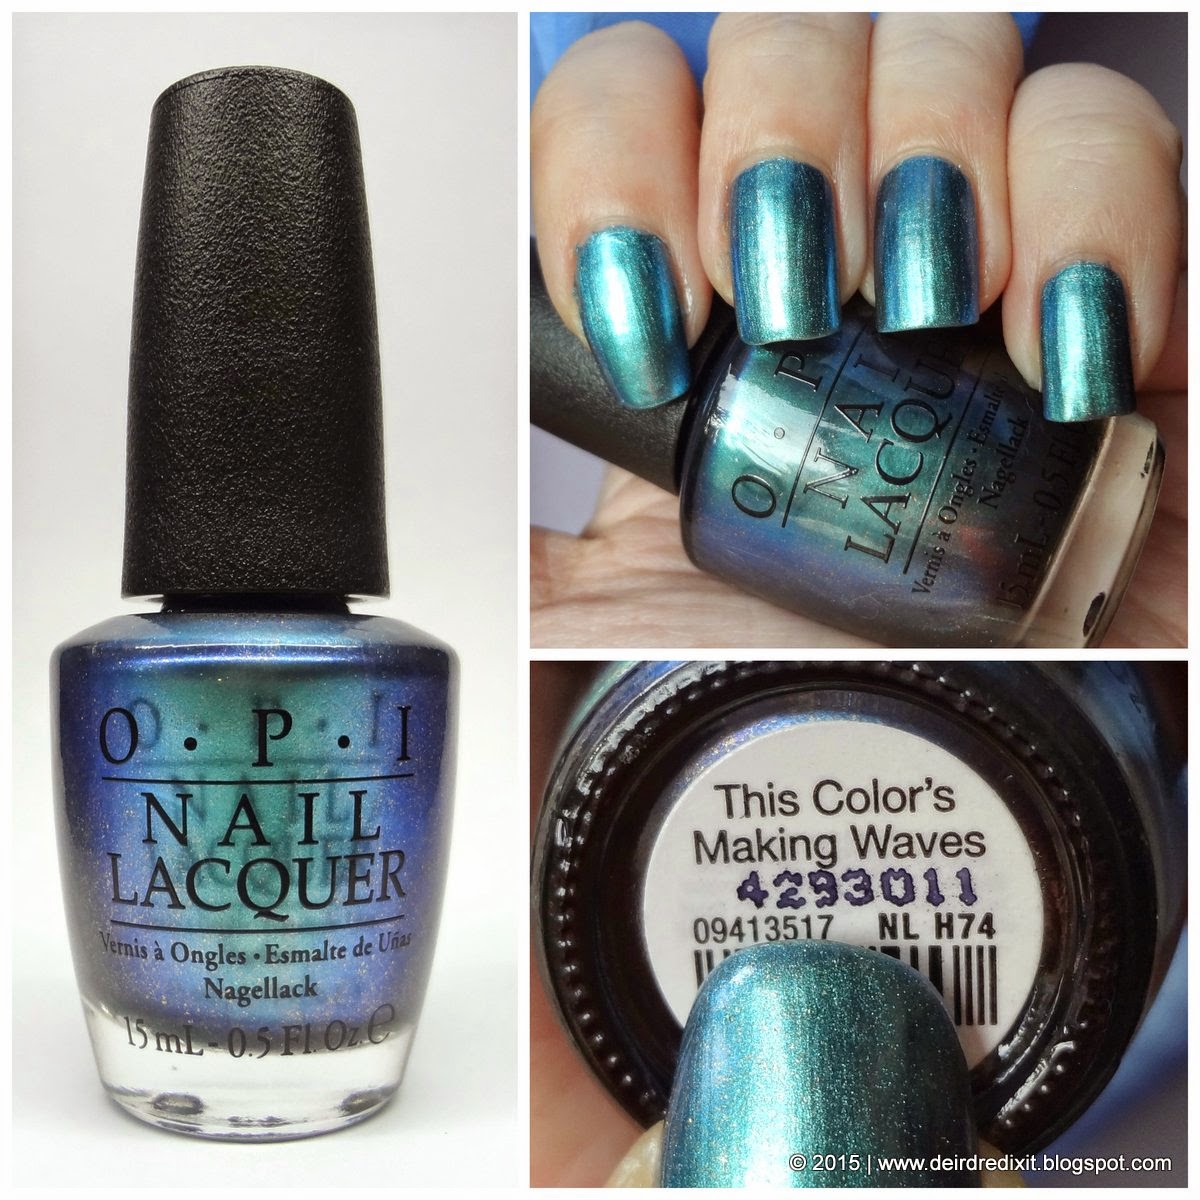 Opi Hawaii Collection swatch This Color’s Making Waves